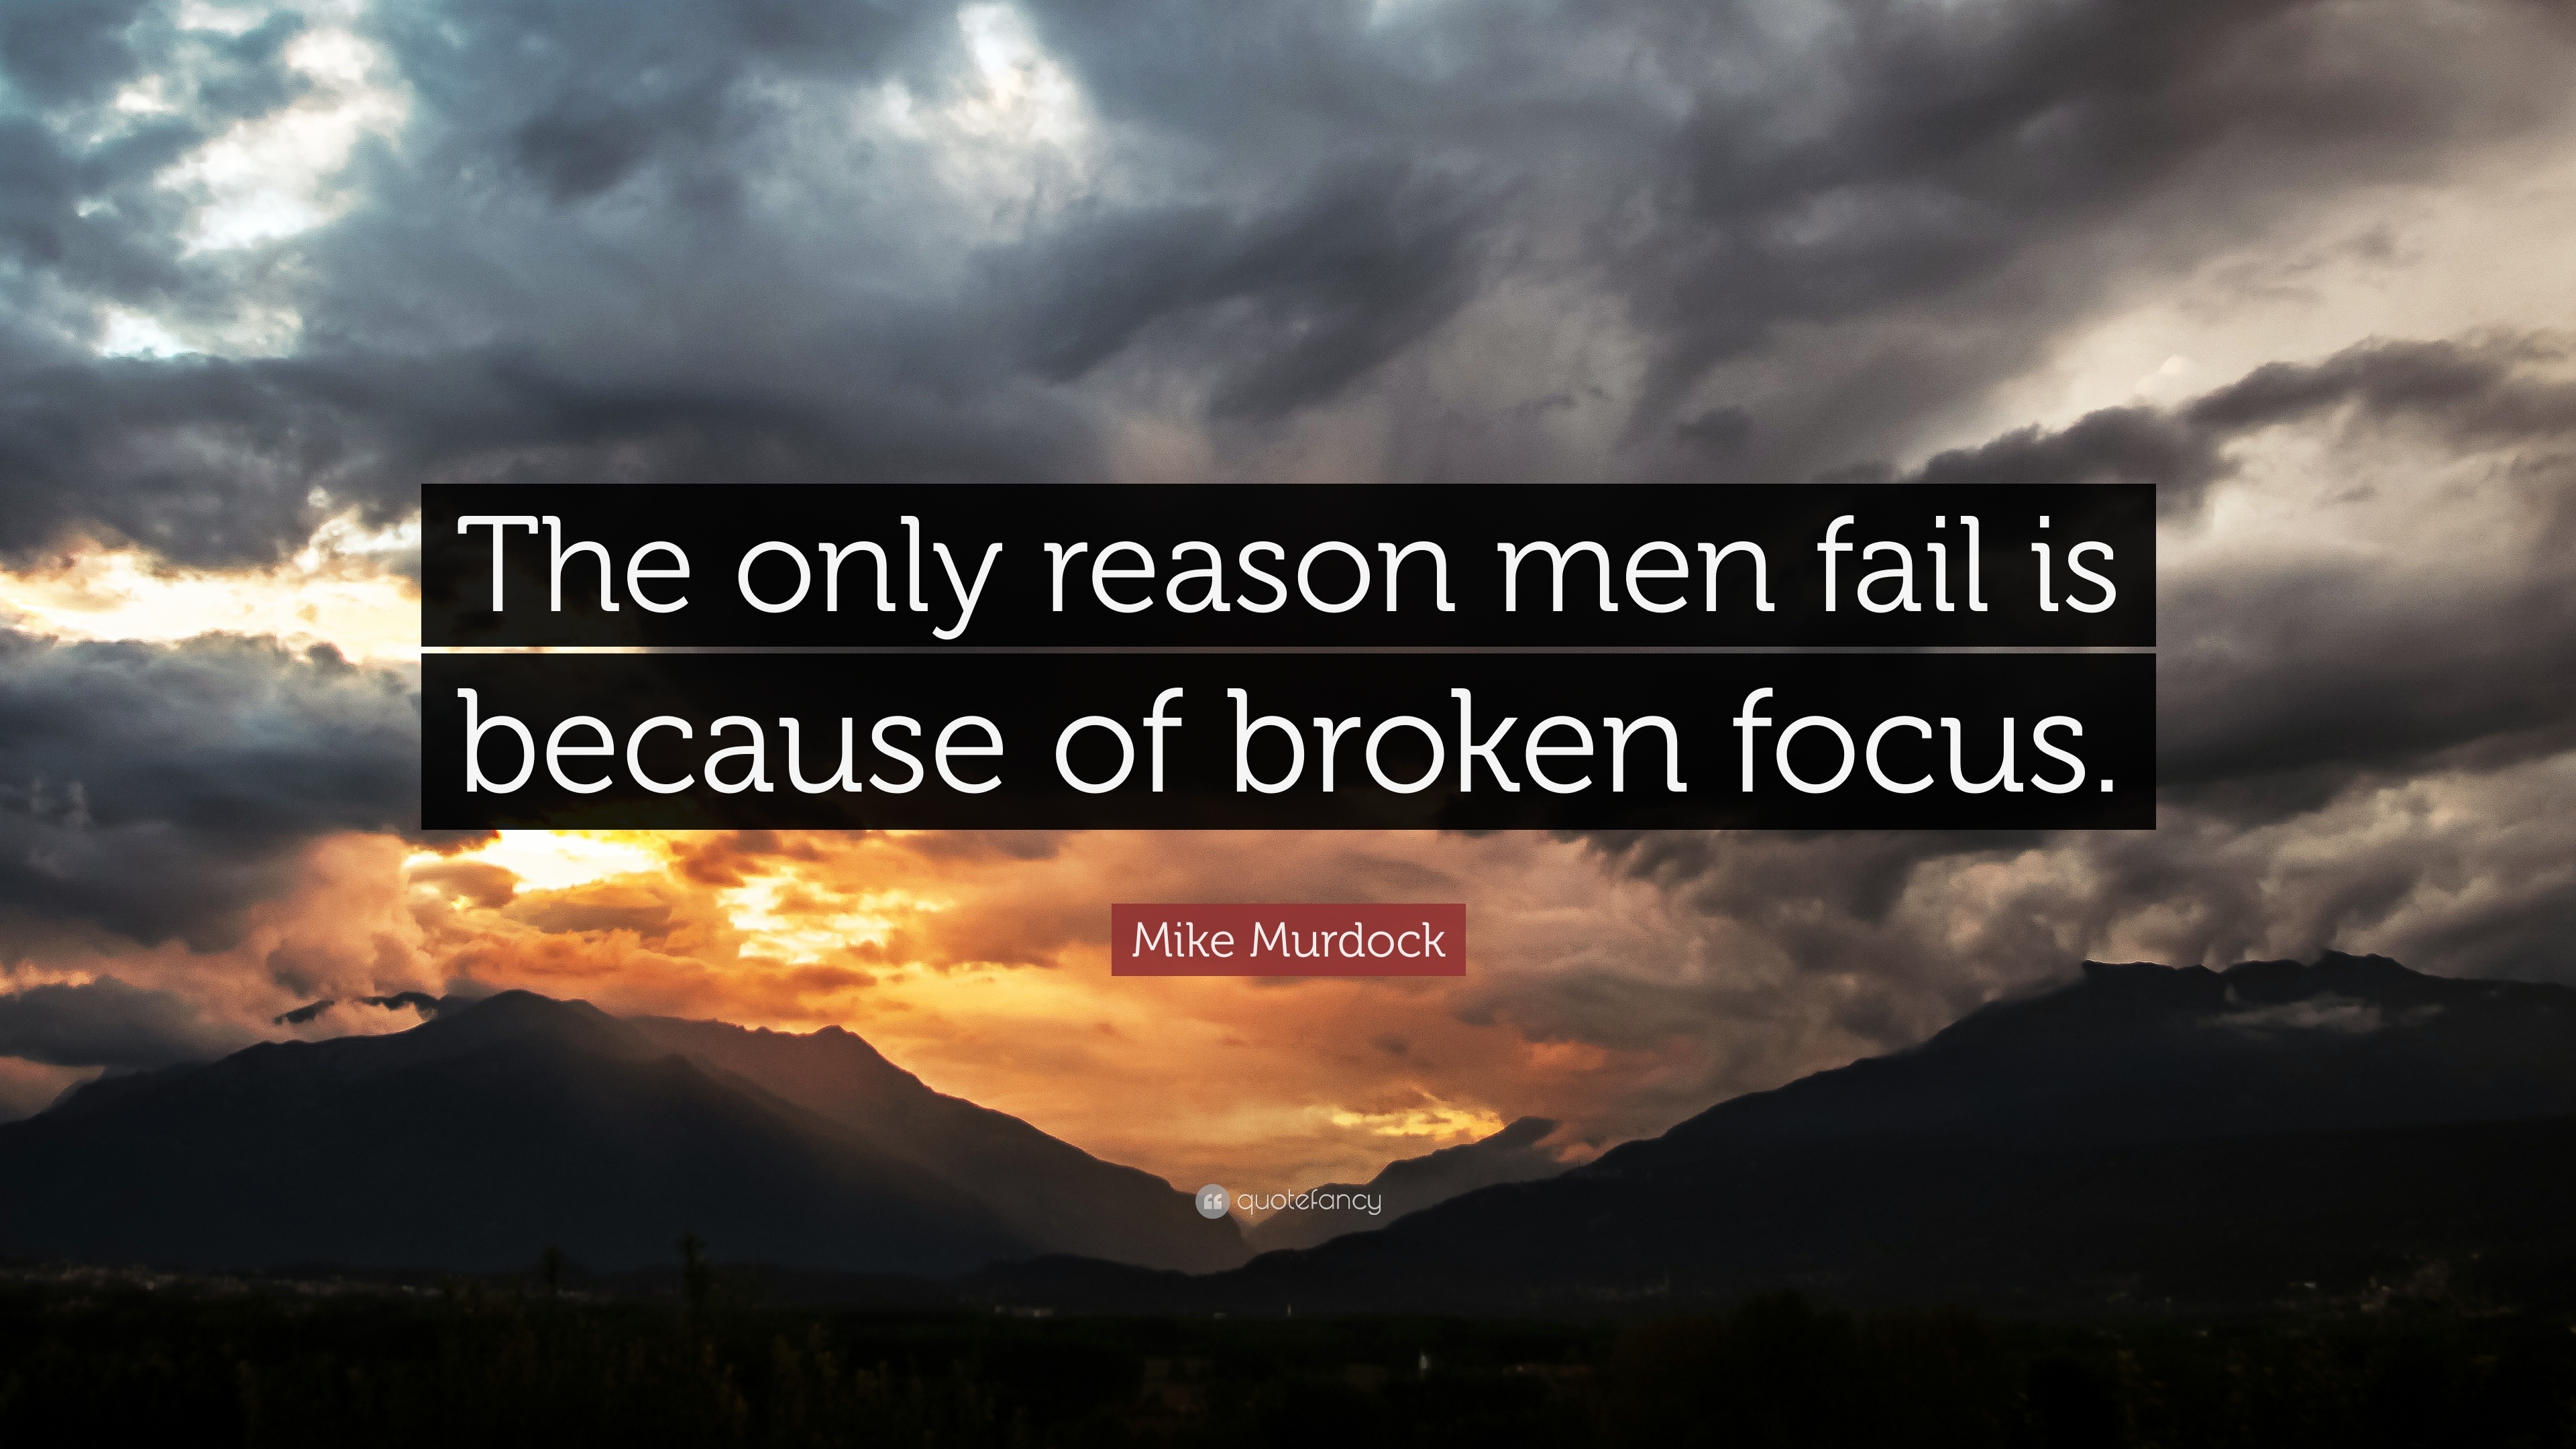 Mike Murdock Quote: “The only reason